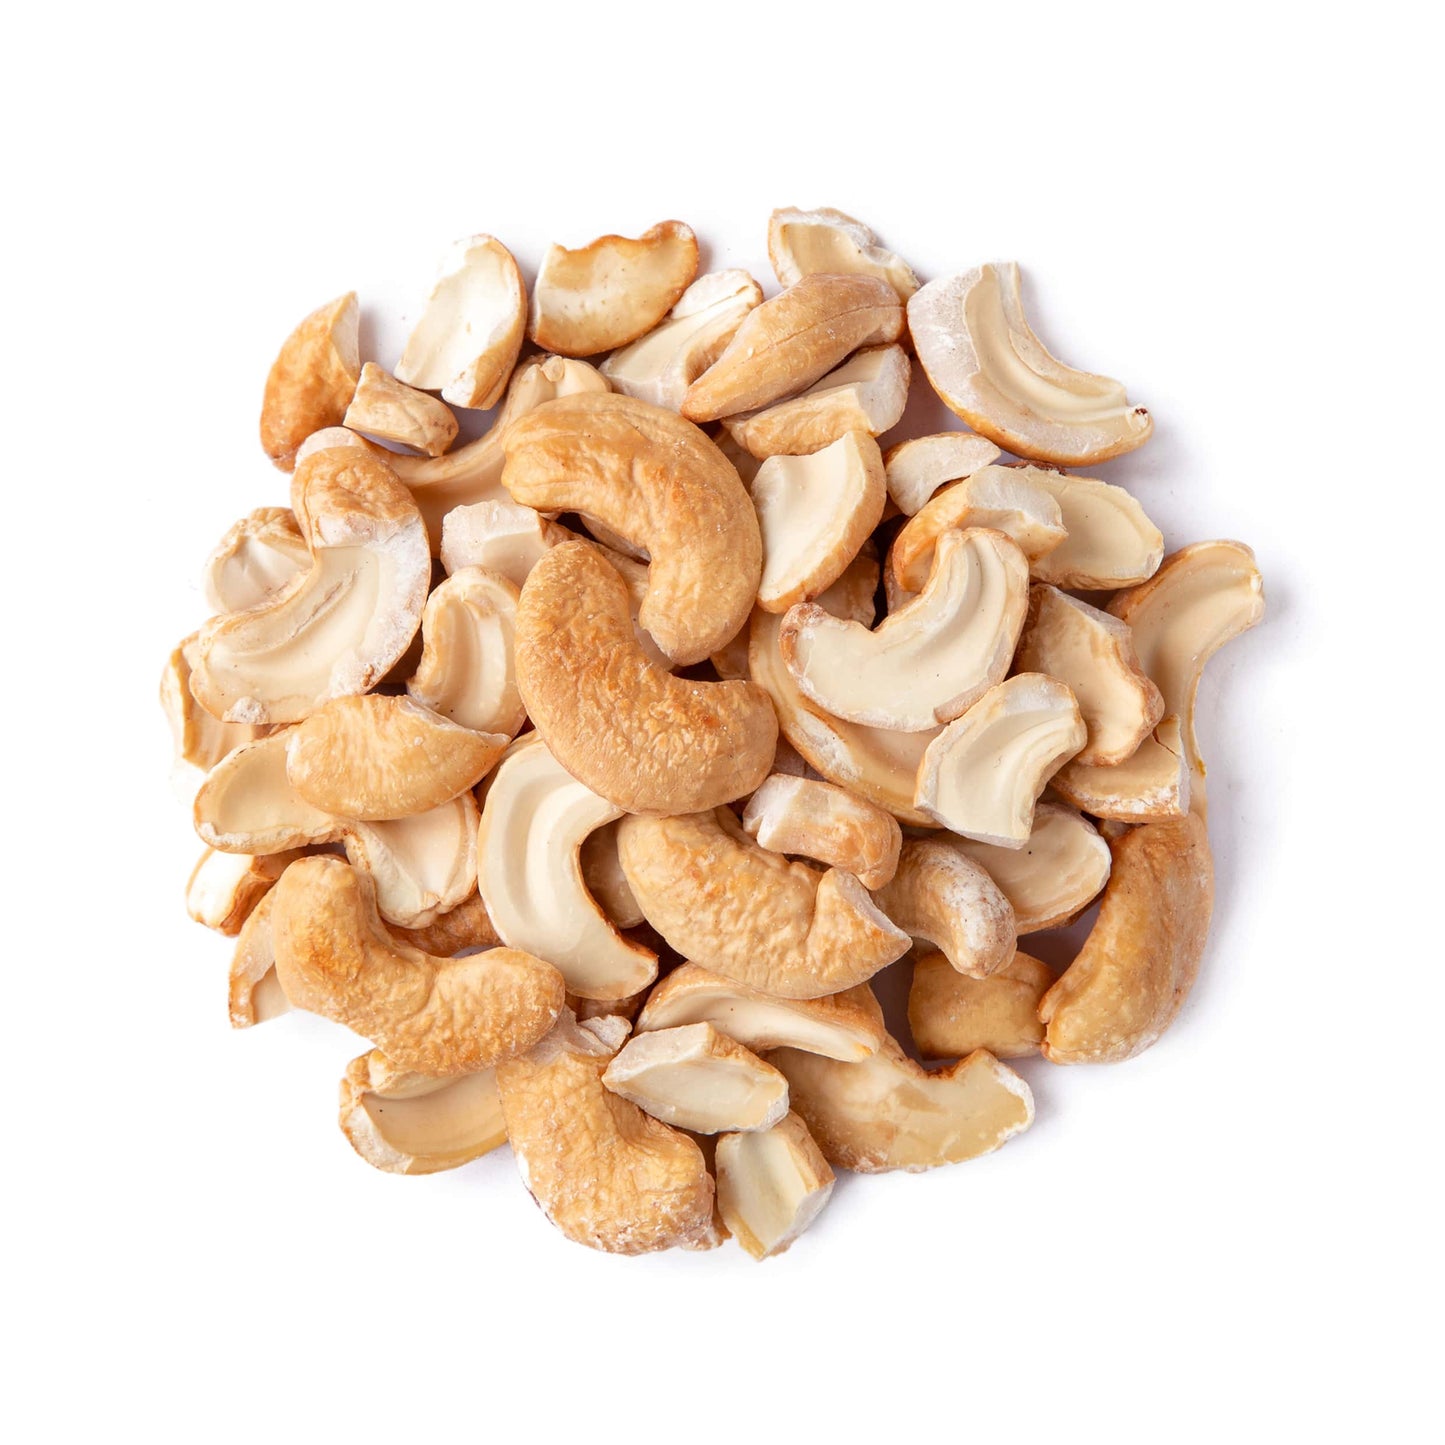 Organic Dry Roasted Cashew Halves and Pieces – Unsalted, Non-GMO, Vegan-Friendly, Perfect Snack for Anytime! - No Chemicals or Artificial Ingredients - Rich in Nutrients & Tasty